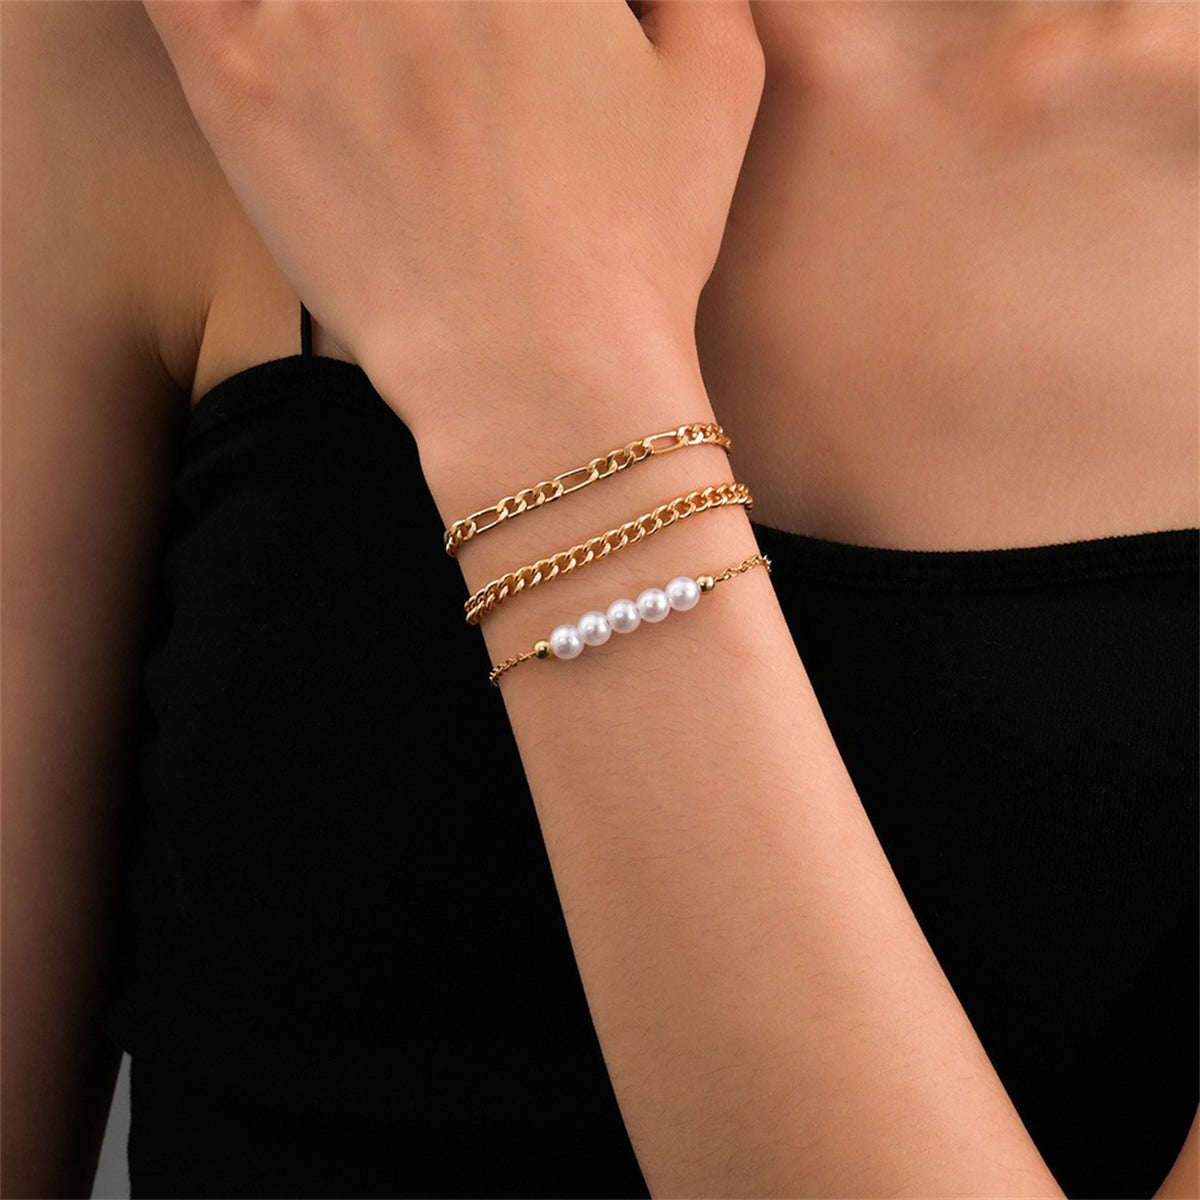 Pearl & 18K Gold-Plated Chain Bracelet Set